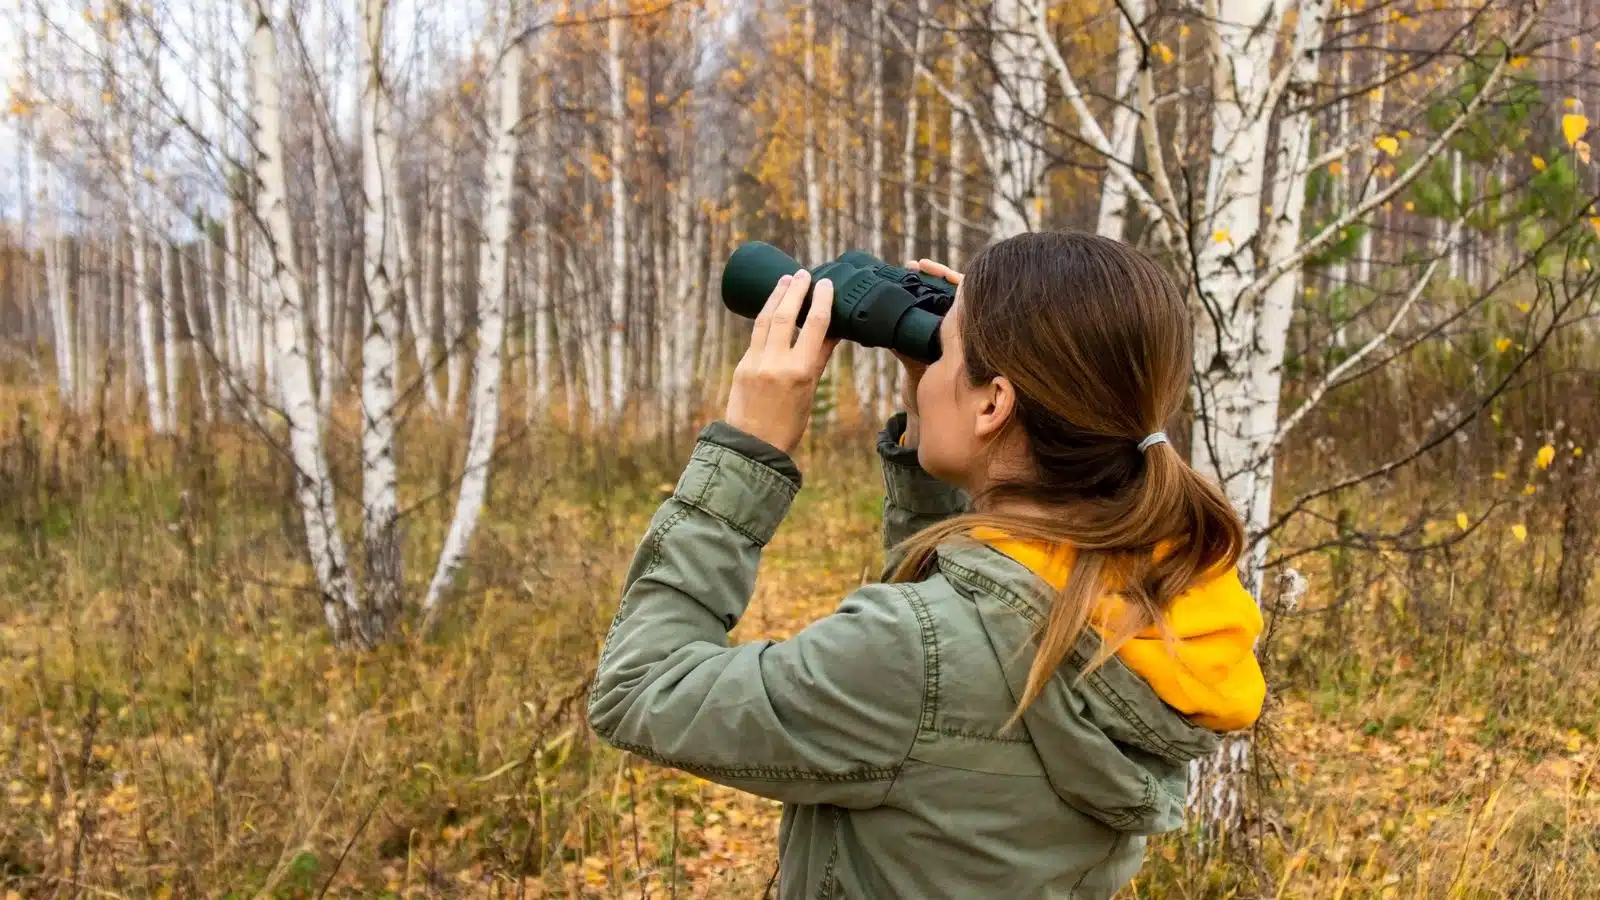 10 Surprisingly Good Hobbies That Are Completely Free To Start